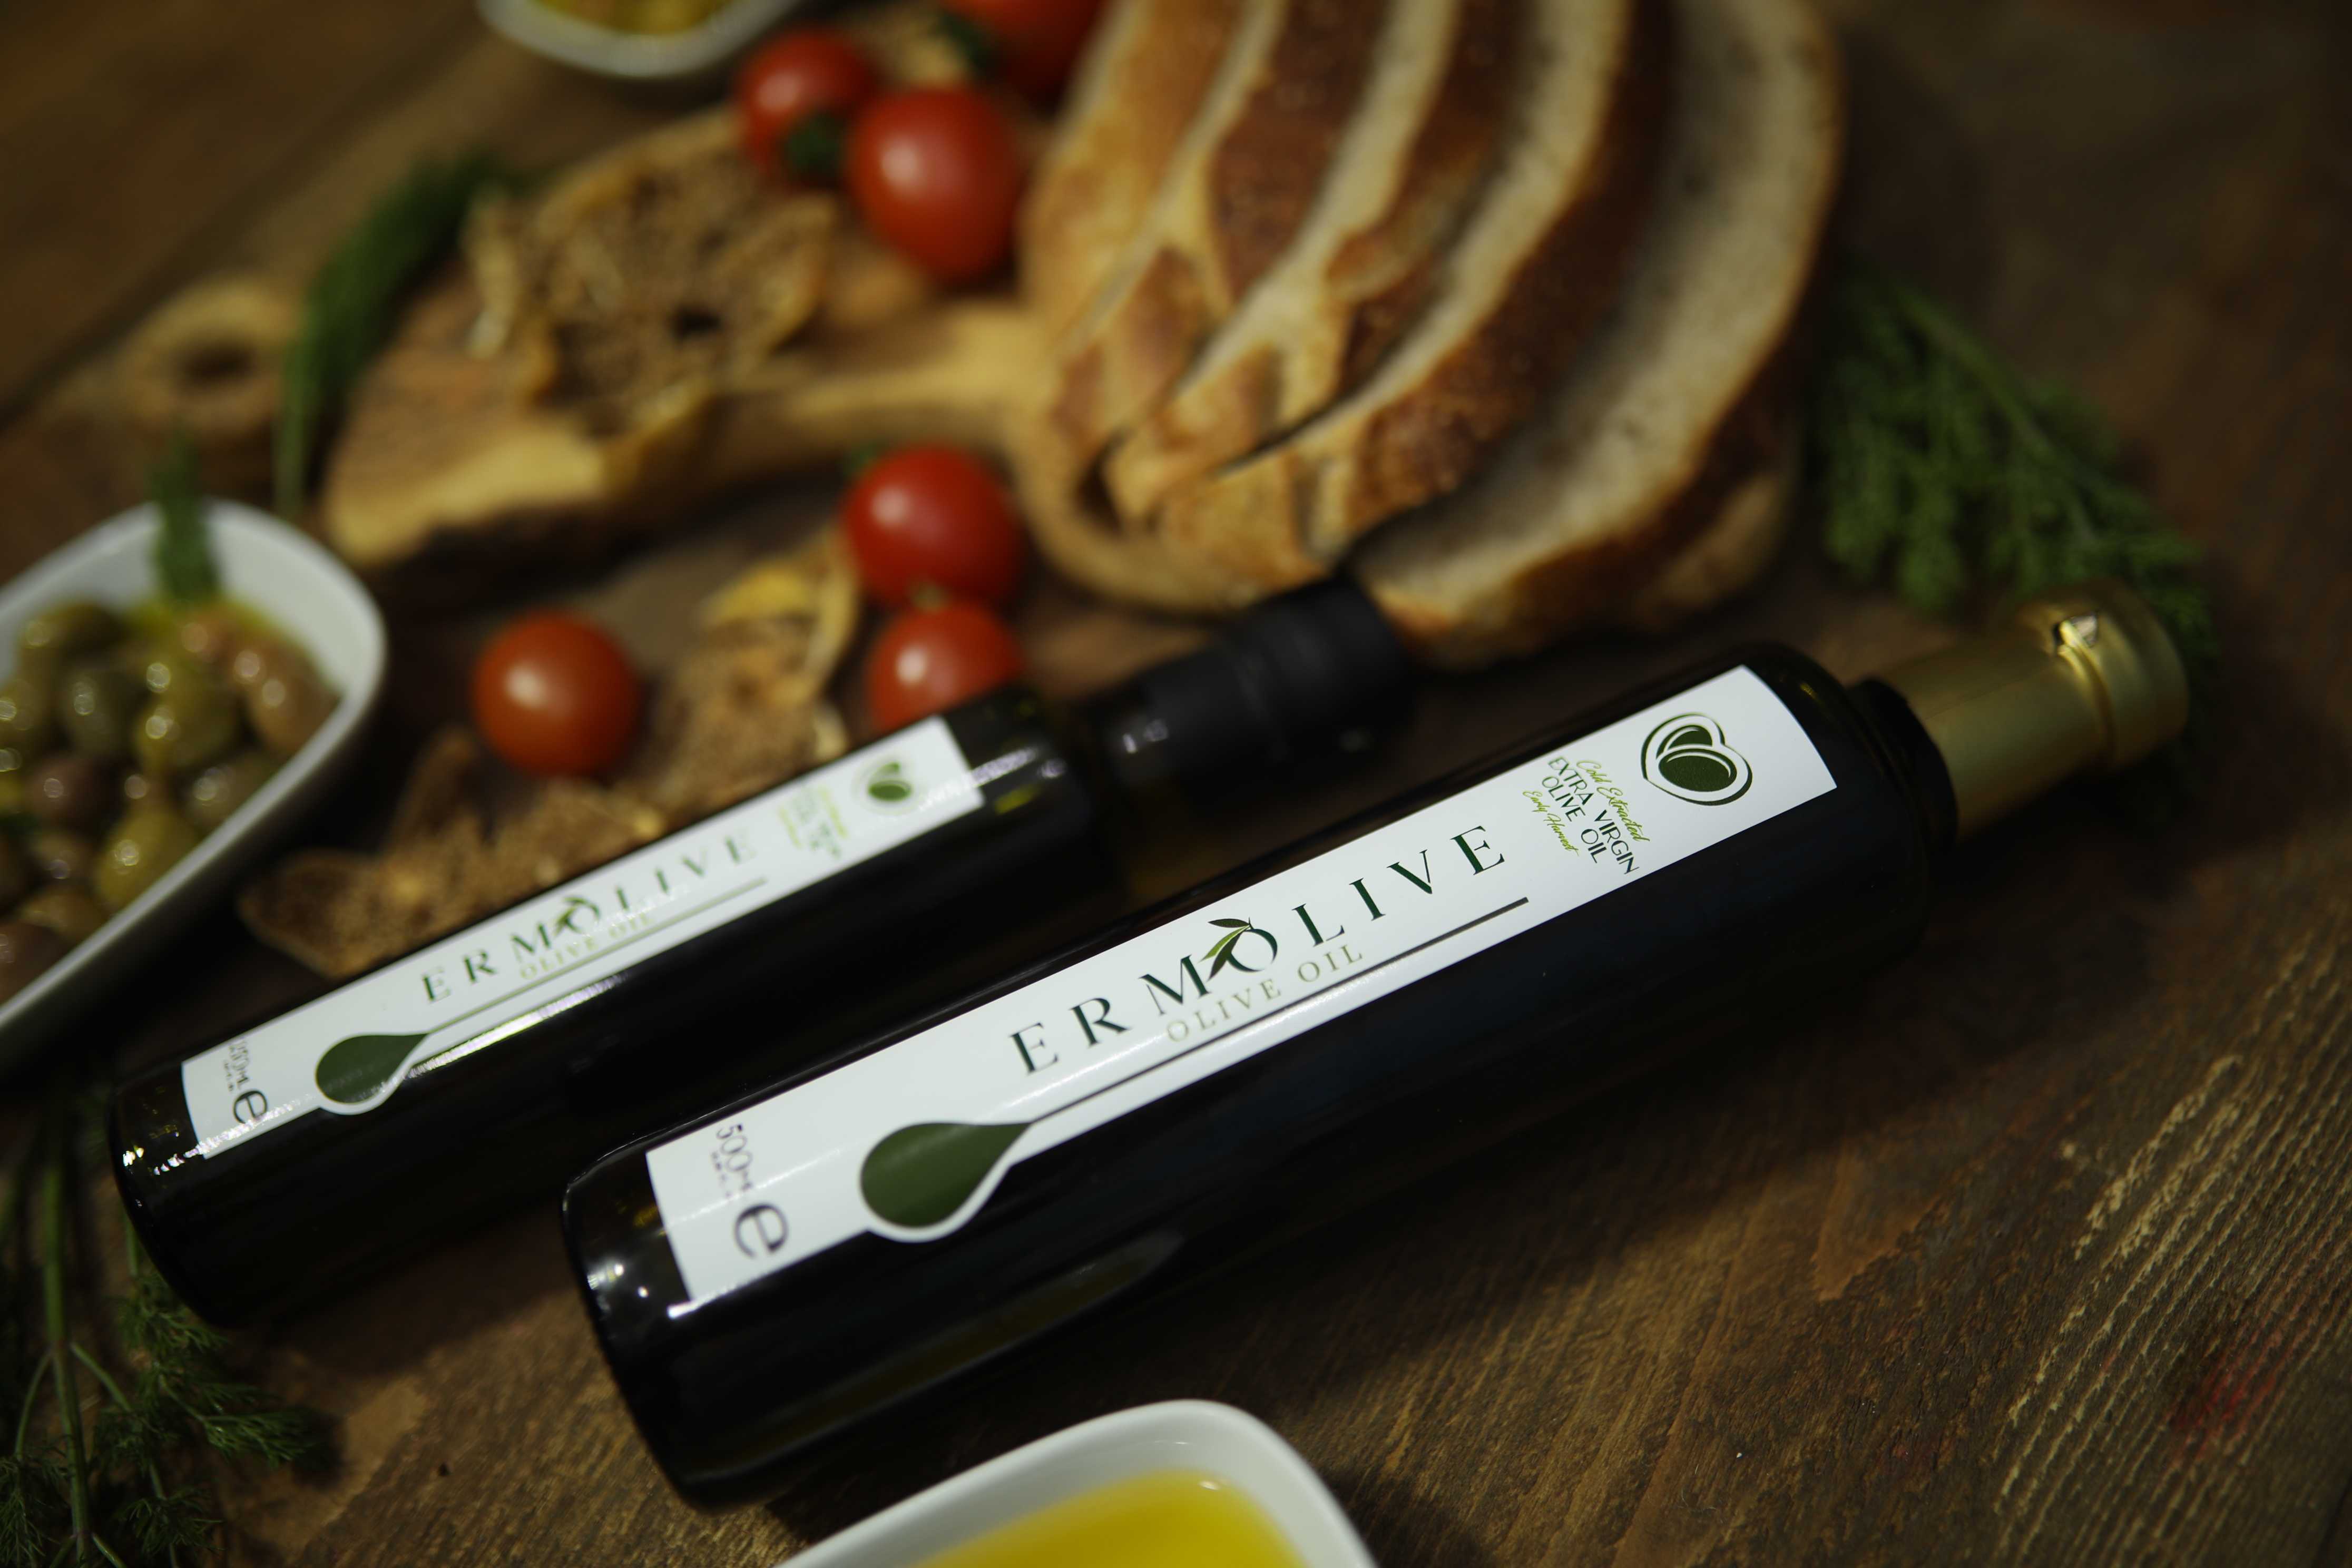 Ermolive Olive Oil Product